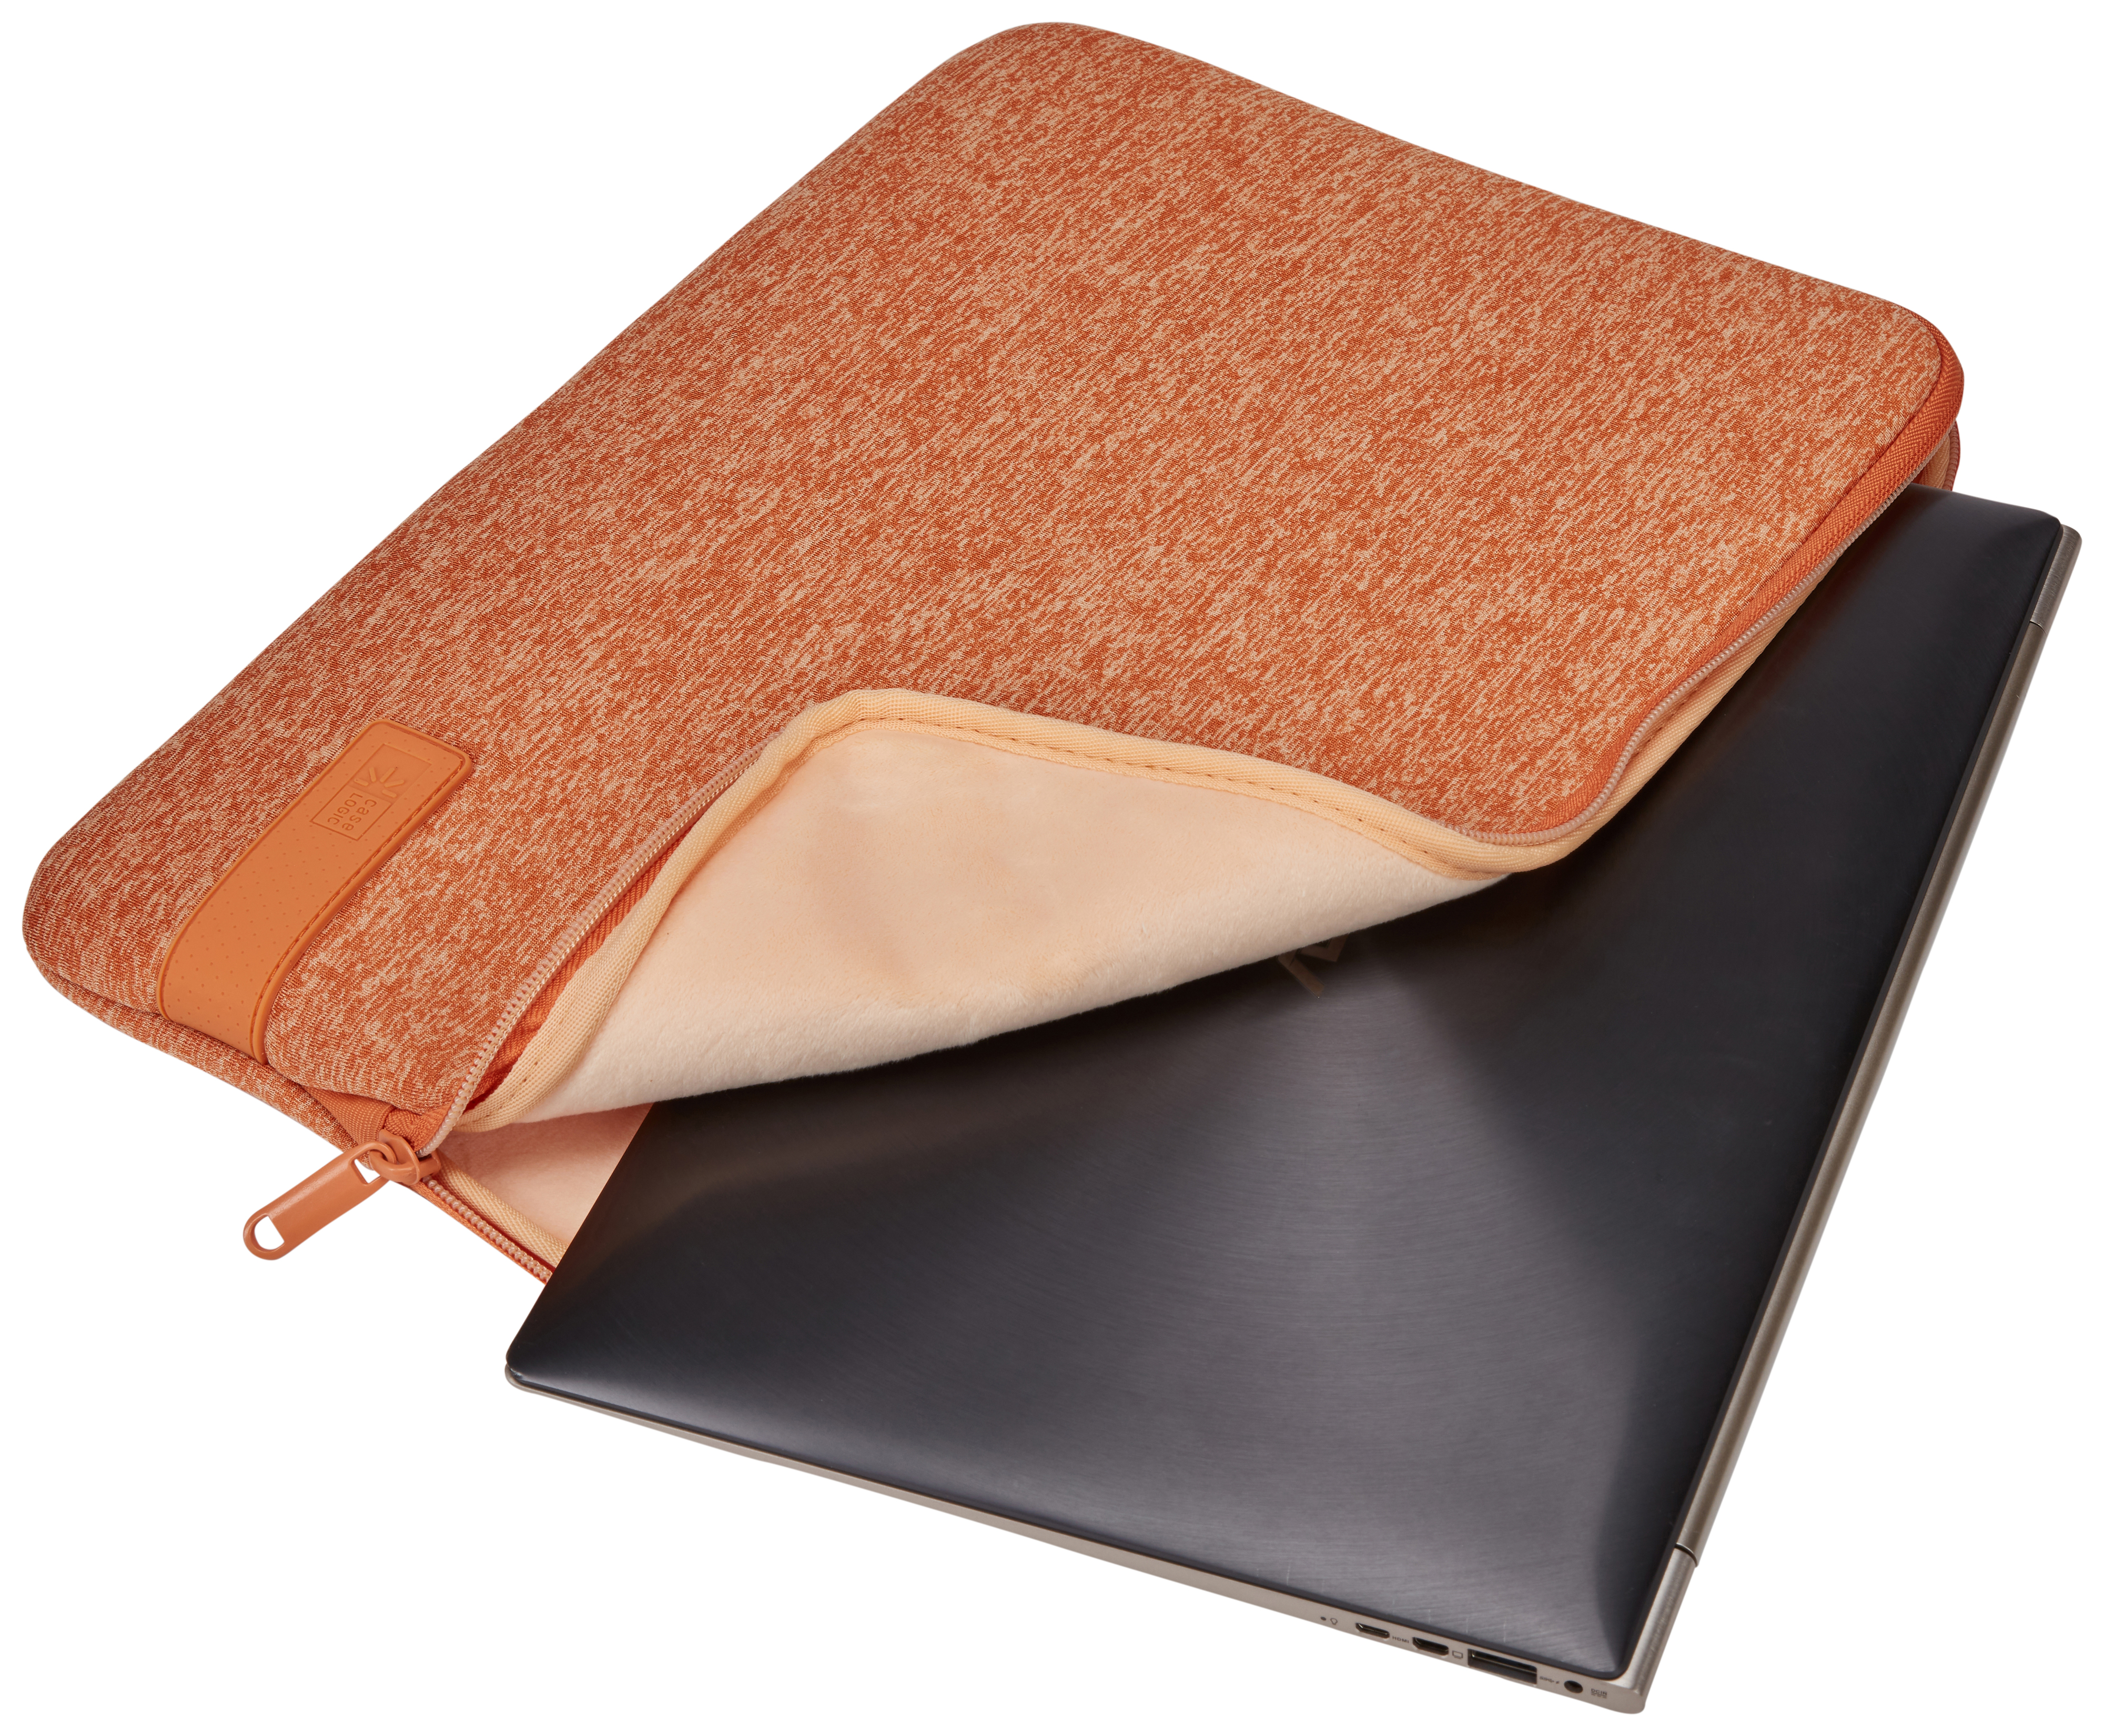 CASE LOGIC Sleeve Sleeve Notebook für Polyester, Coral Universal Reflect Gold/Apricot